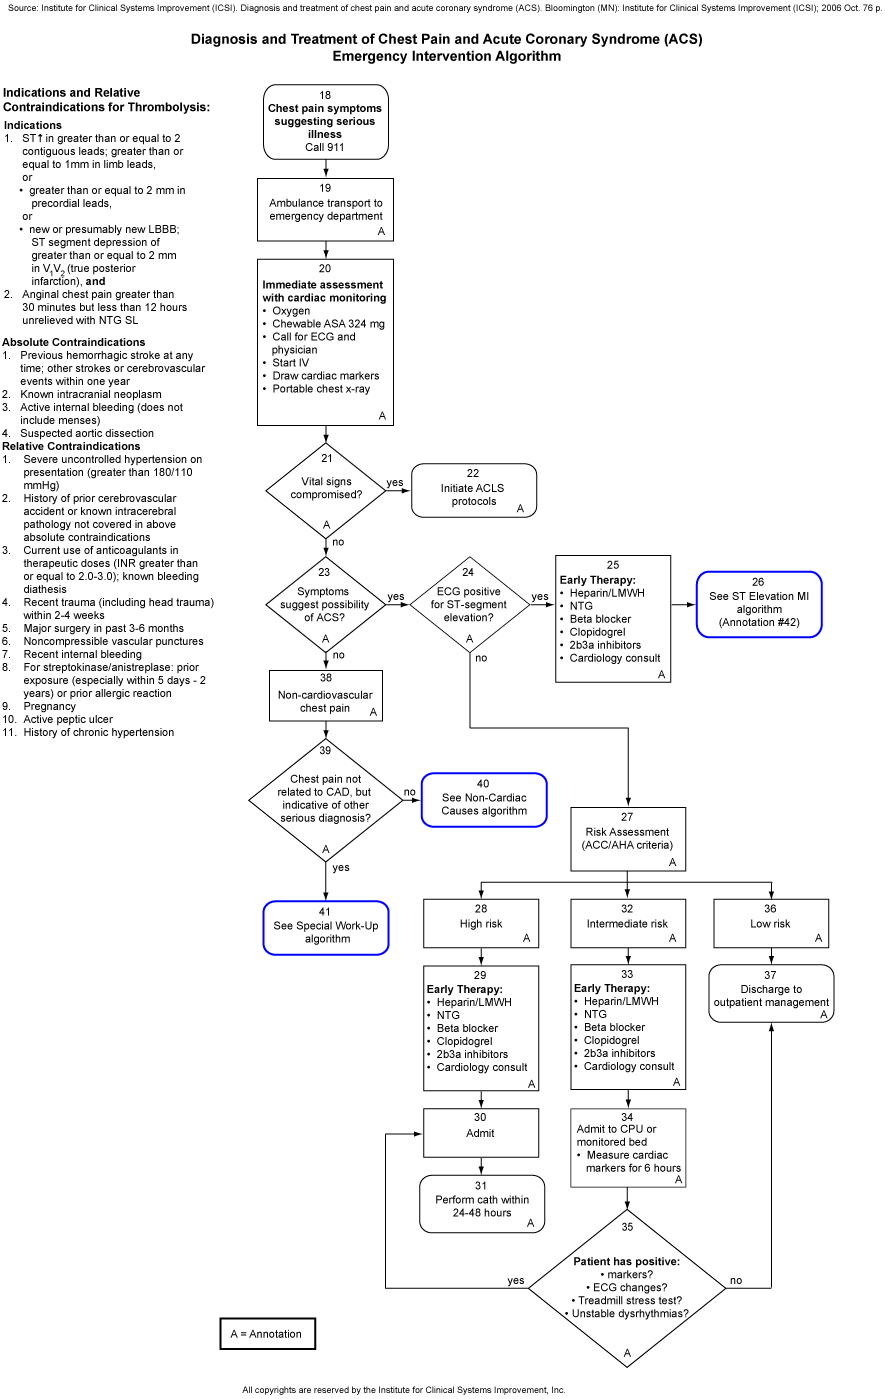 Diagnosis and Treatment of Chest Pain and Acute Coronary Syndrome (ACS). Emergency Intervention Algorithm.